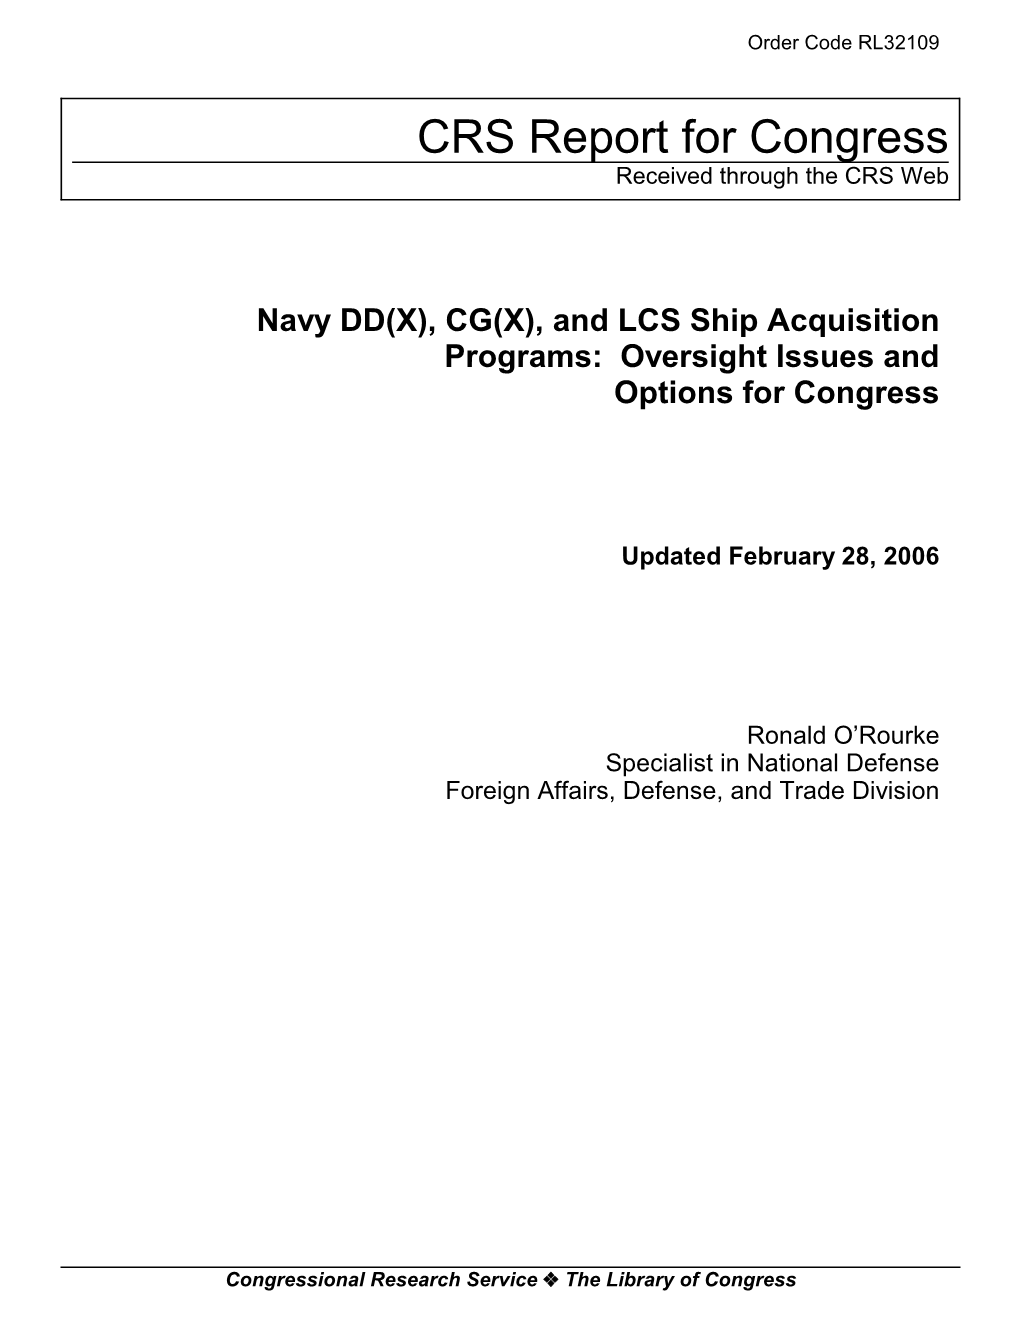 Navy DD(X), CG(X), and LCS Ship Acquisition Programs: Oversight Issues and Options for Congress